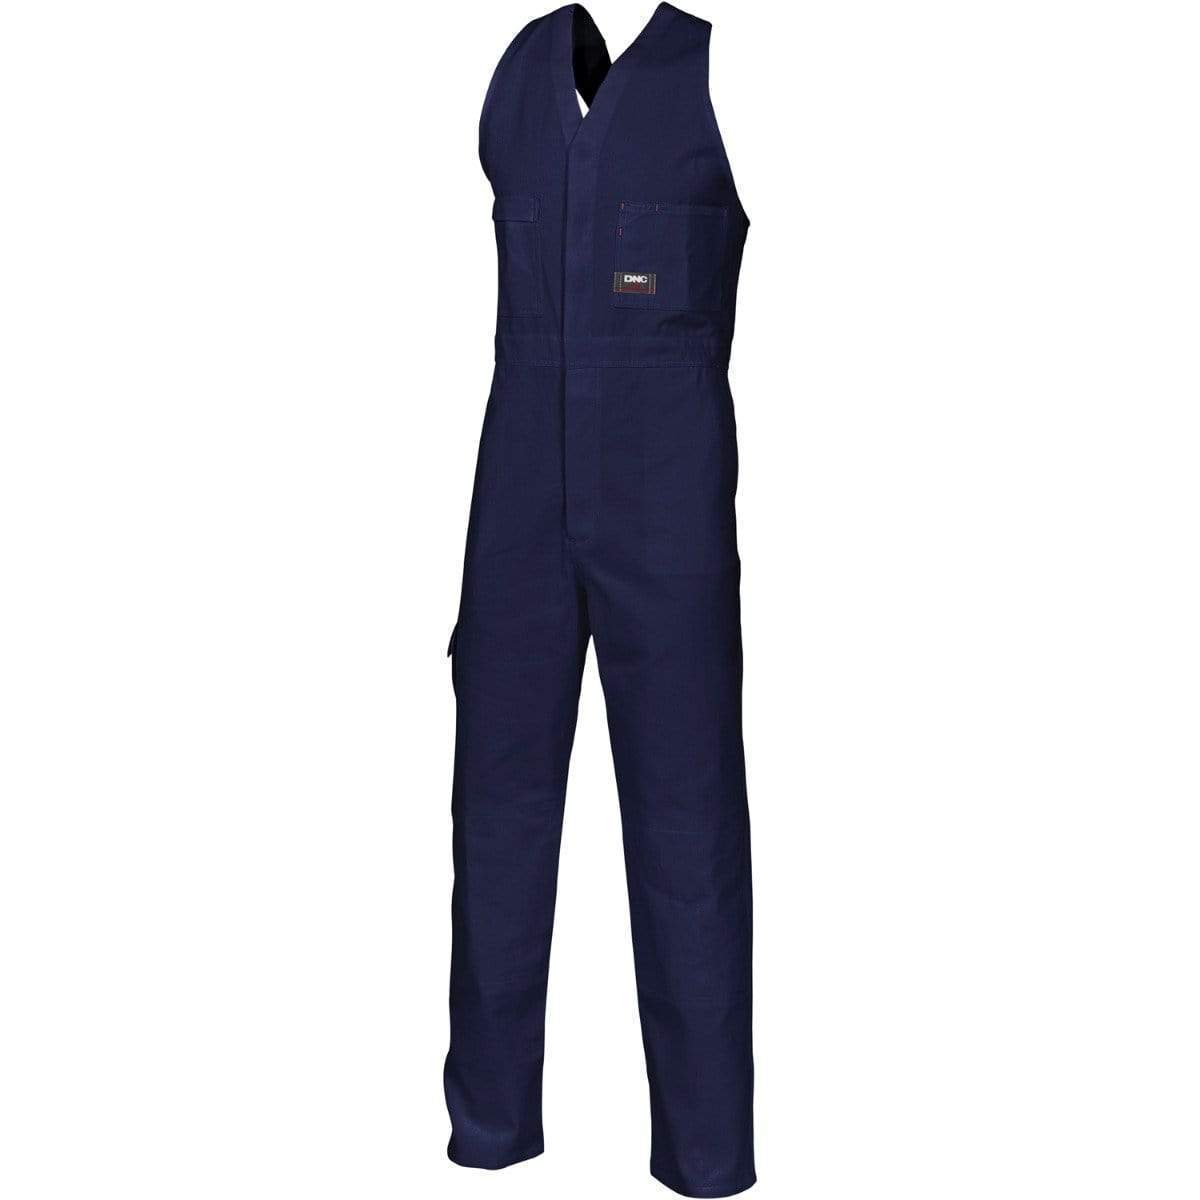 Dnc Workwear Cotton Drill Action Back Overall - 3121 Work Wear DNC Workwear Navy 77R 